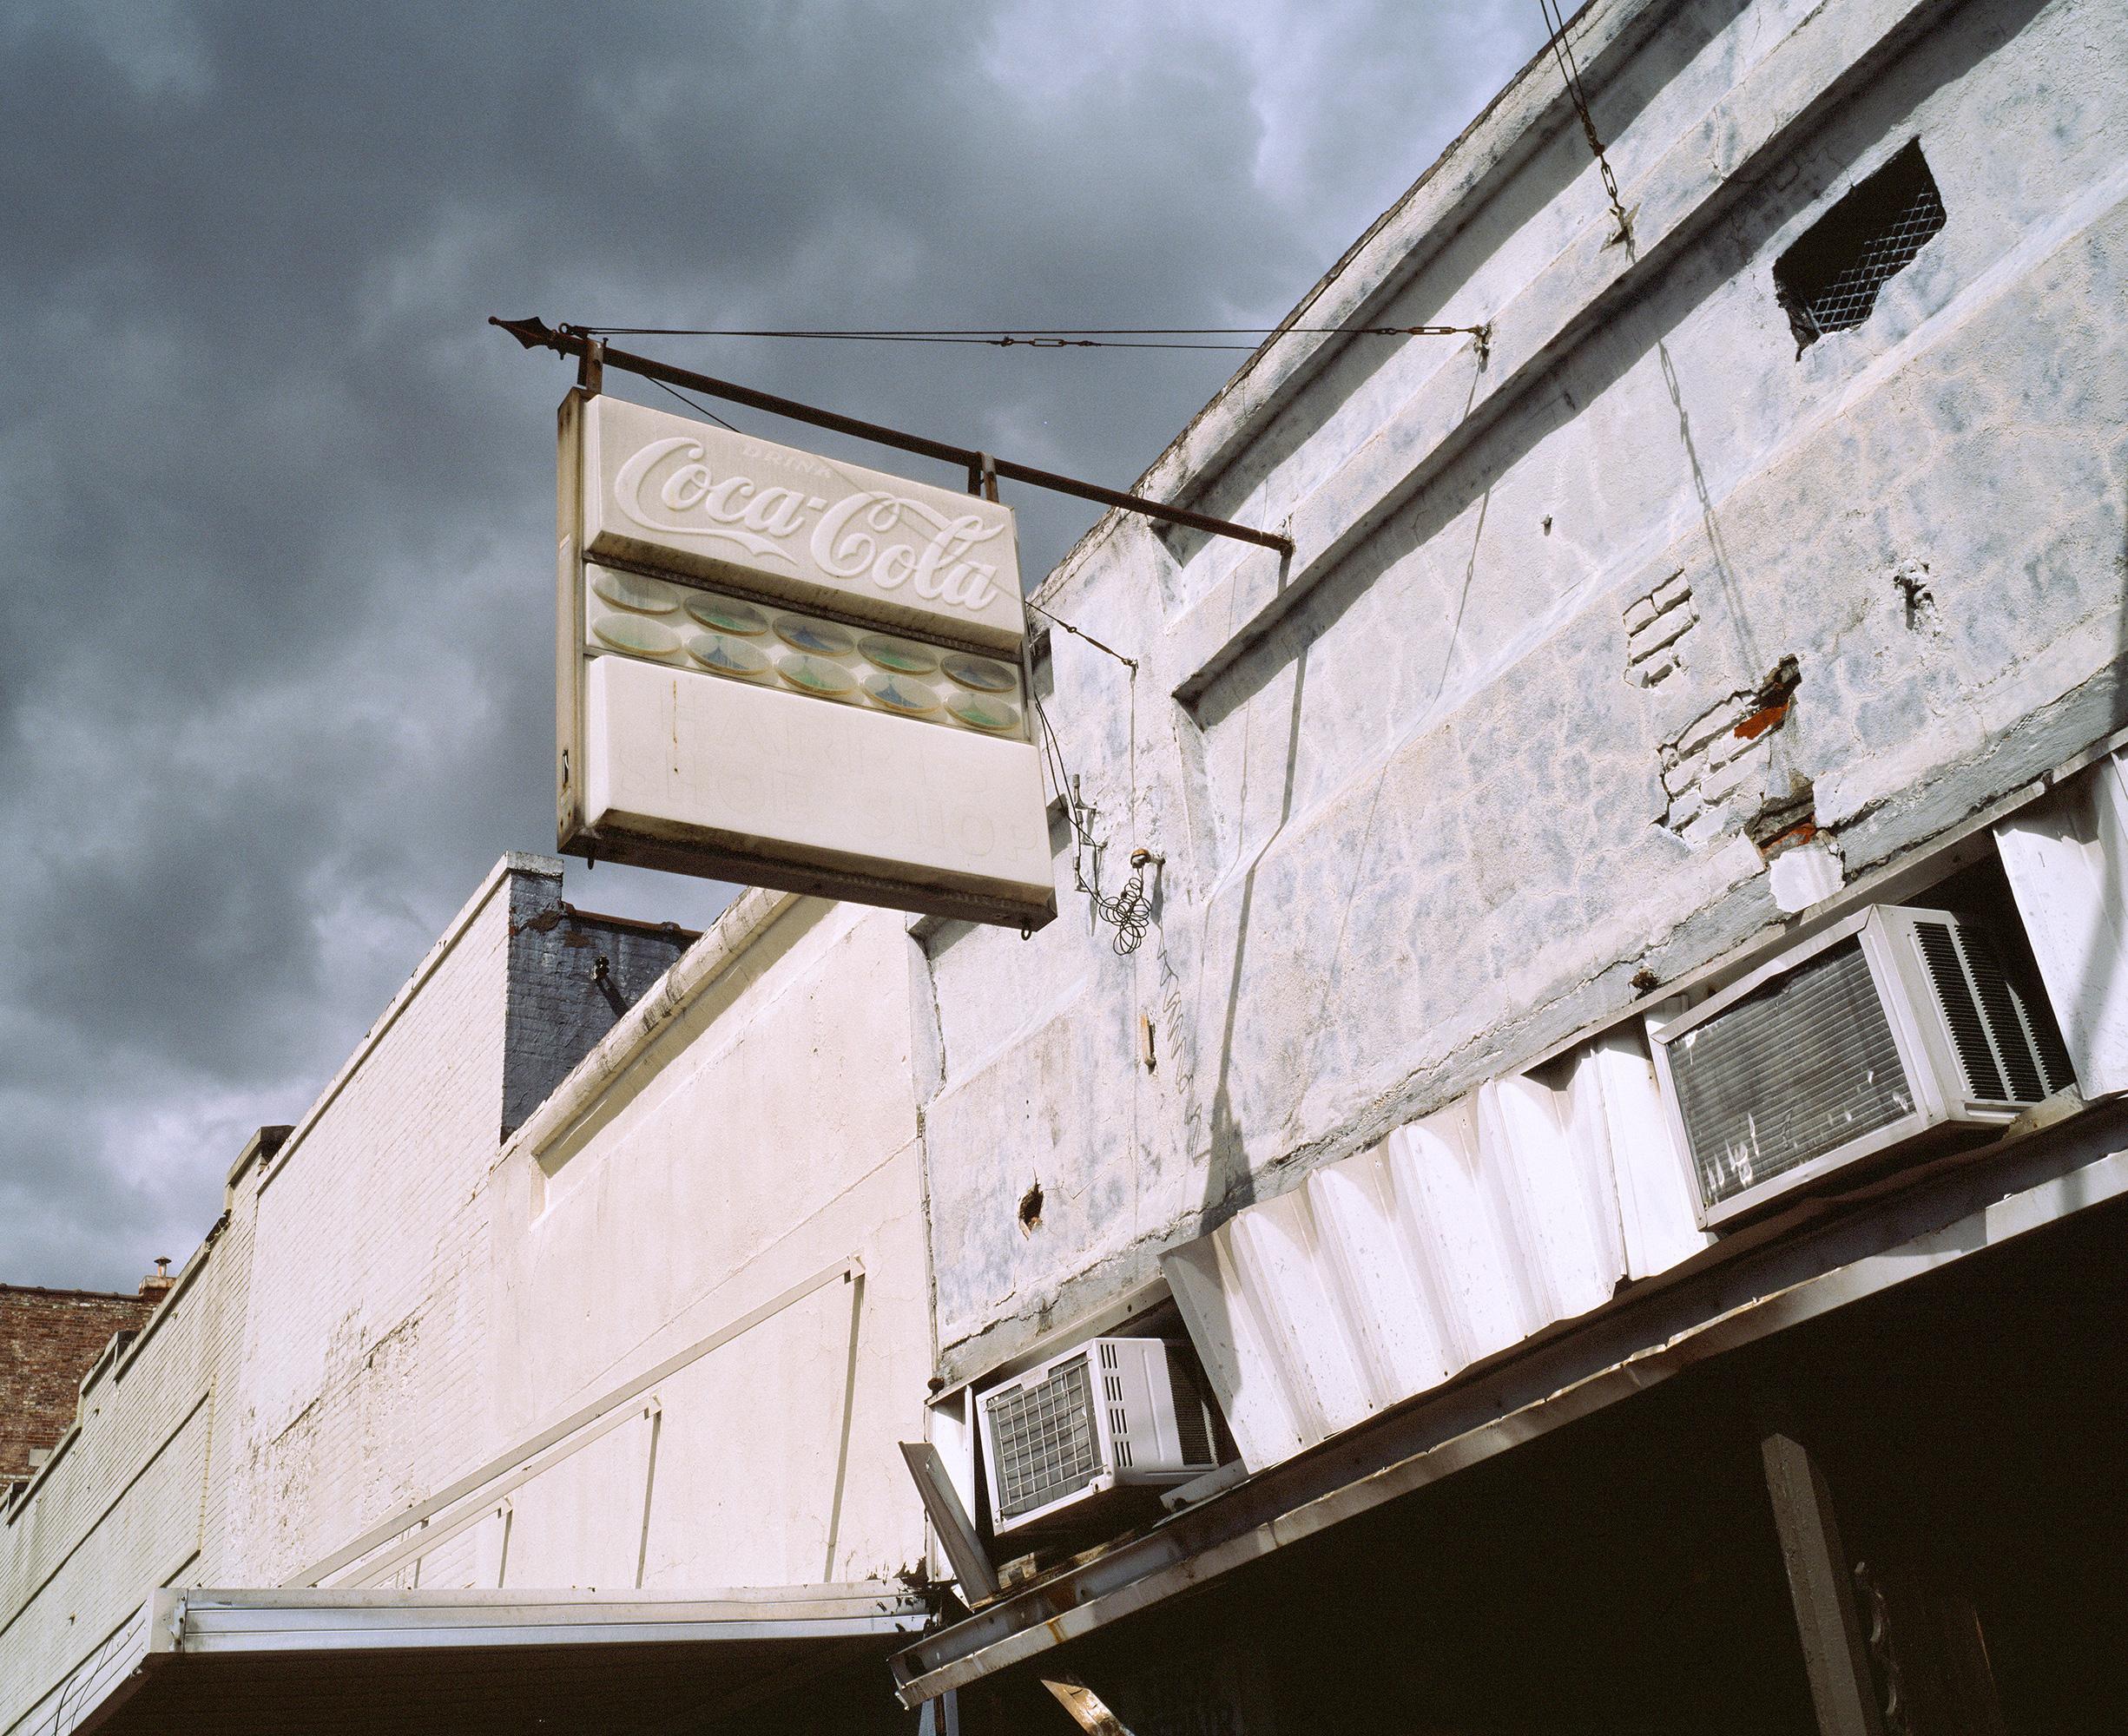 Patrick Sansone uses analog cameras and film to create photographs that reference stillness, lure, and intermission. Decaying signage, abandoned industrial sites, and defunct storefronts are the artifacts of a near-mythic America, now abandoned.